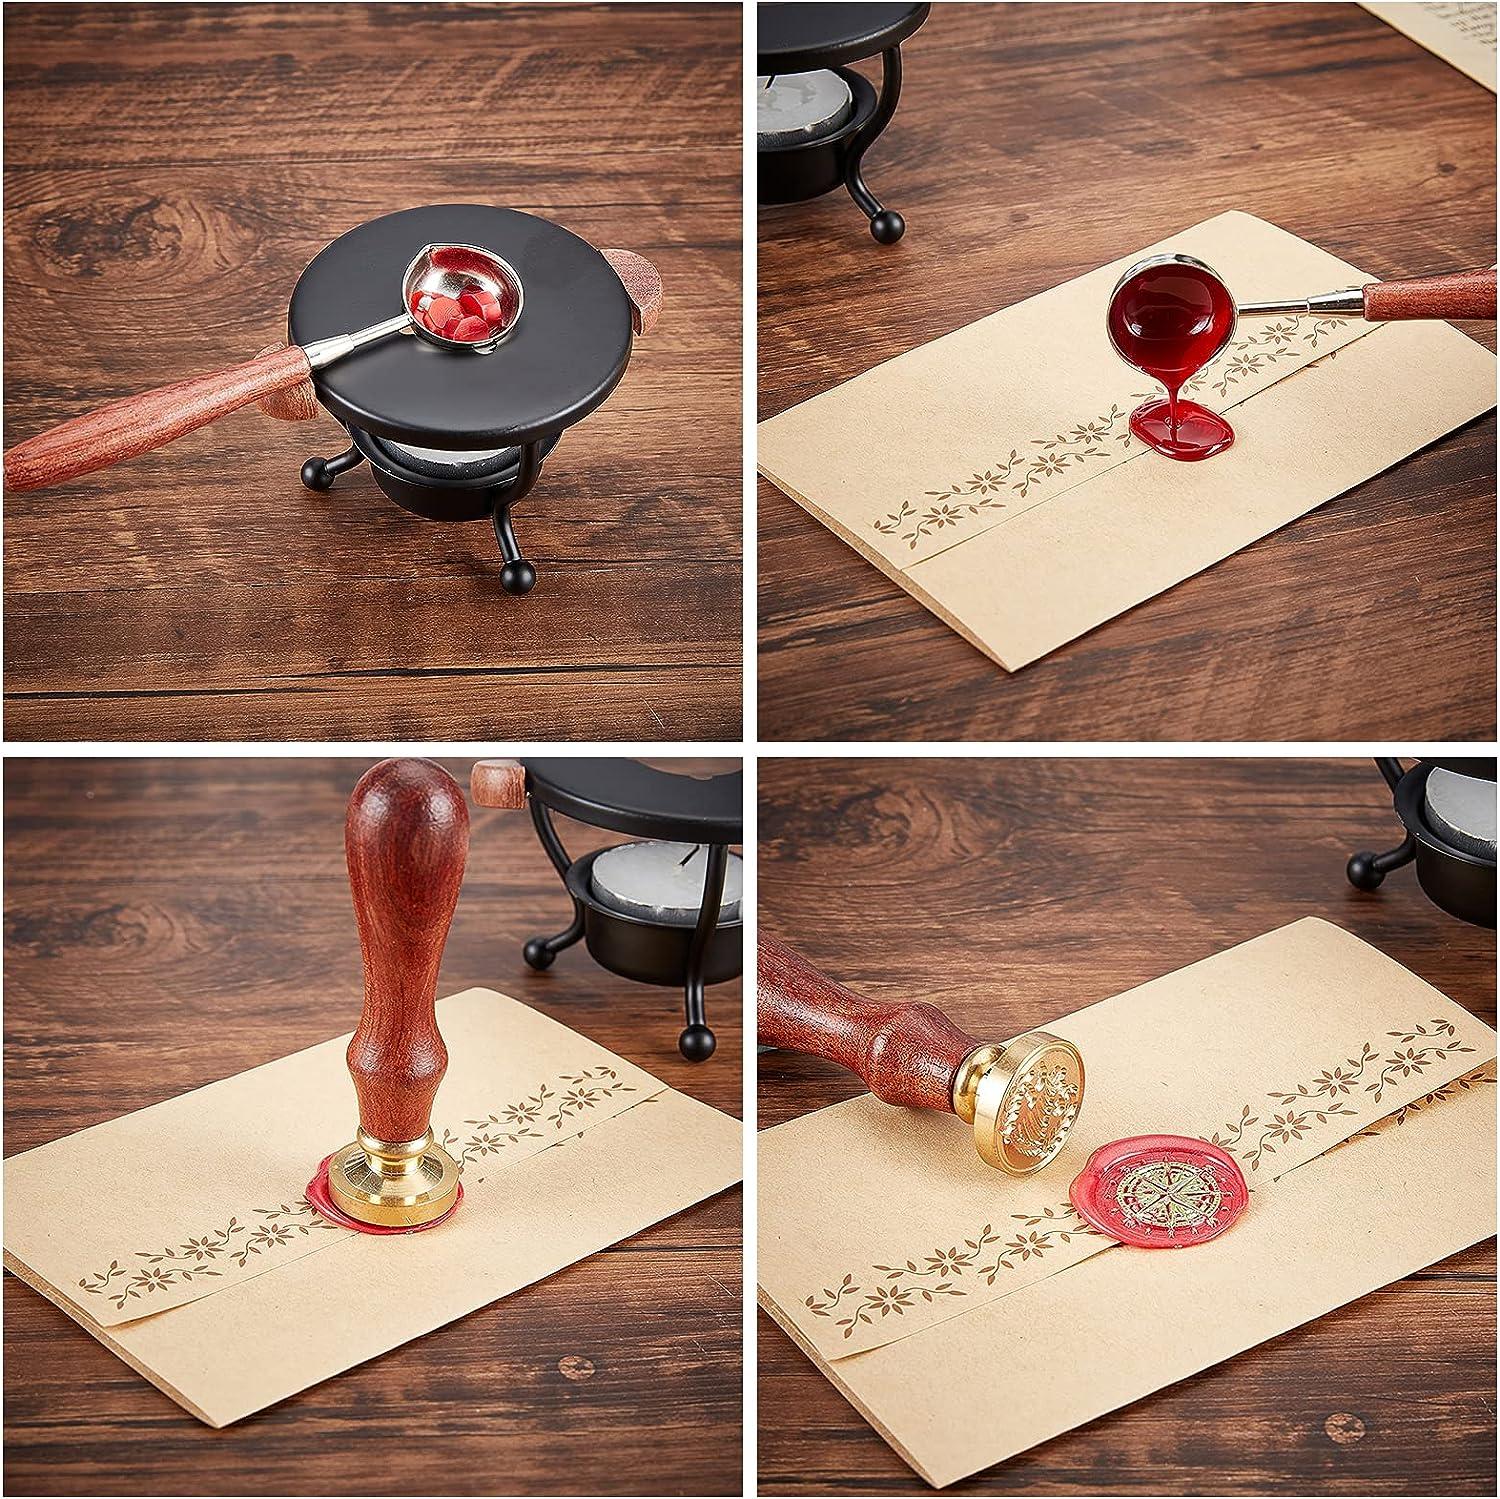 CRASPIRE Wax Seal Stamp Set, 6 Pieces Vintage Sealing Wax Stamps Copper  Seals 2 Wooden Handle, Wax Stamp Kit for Wedding Invitations Cards  Envelopes